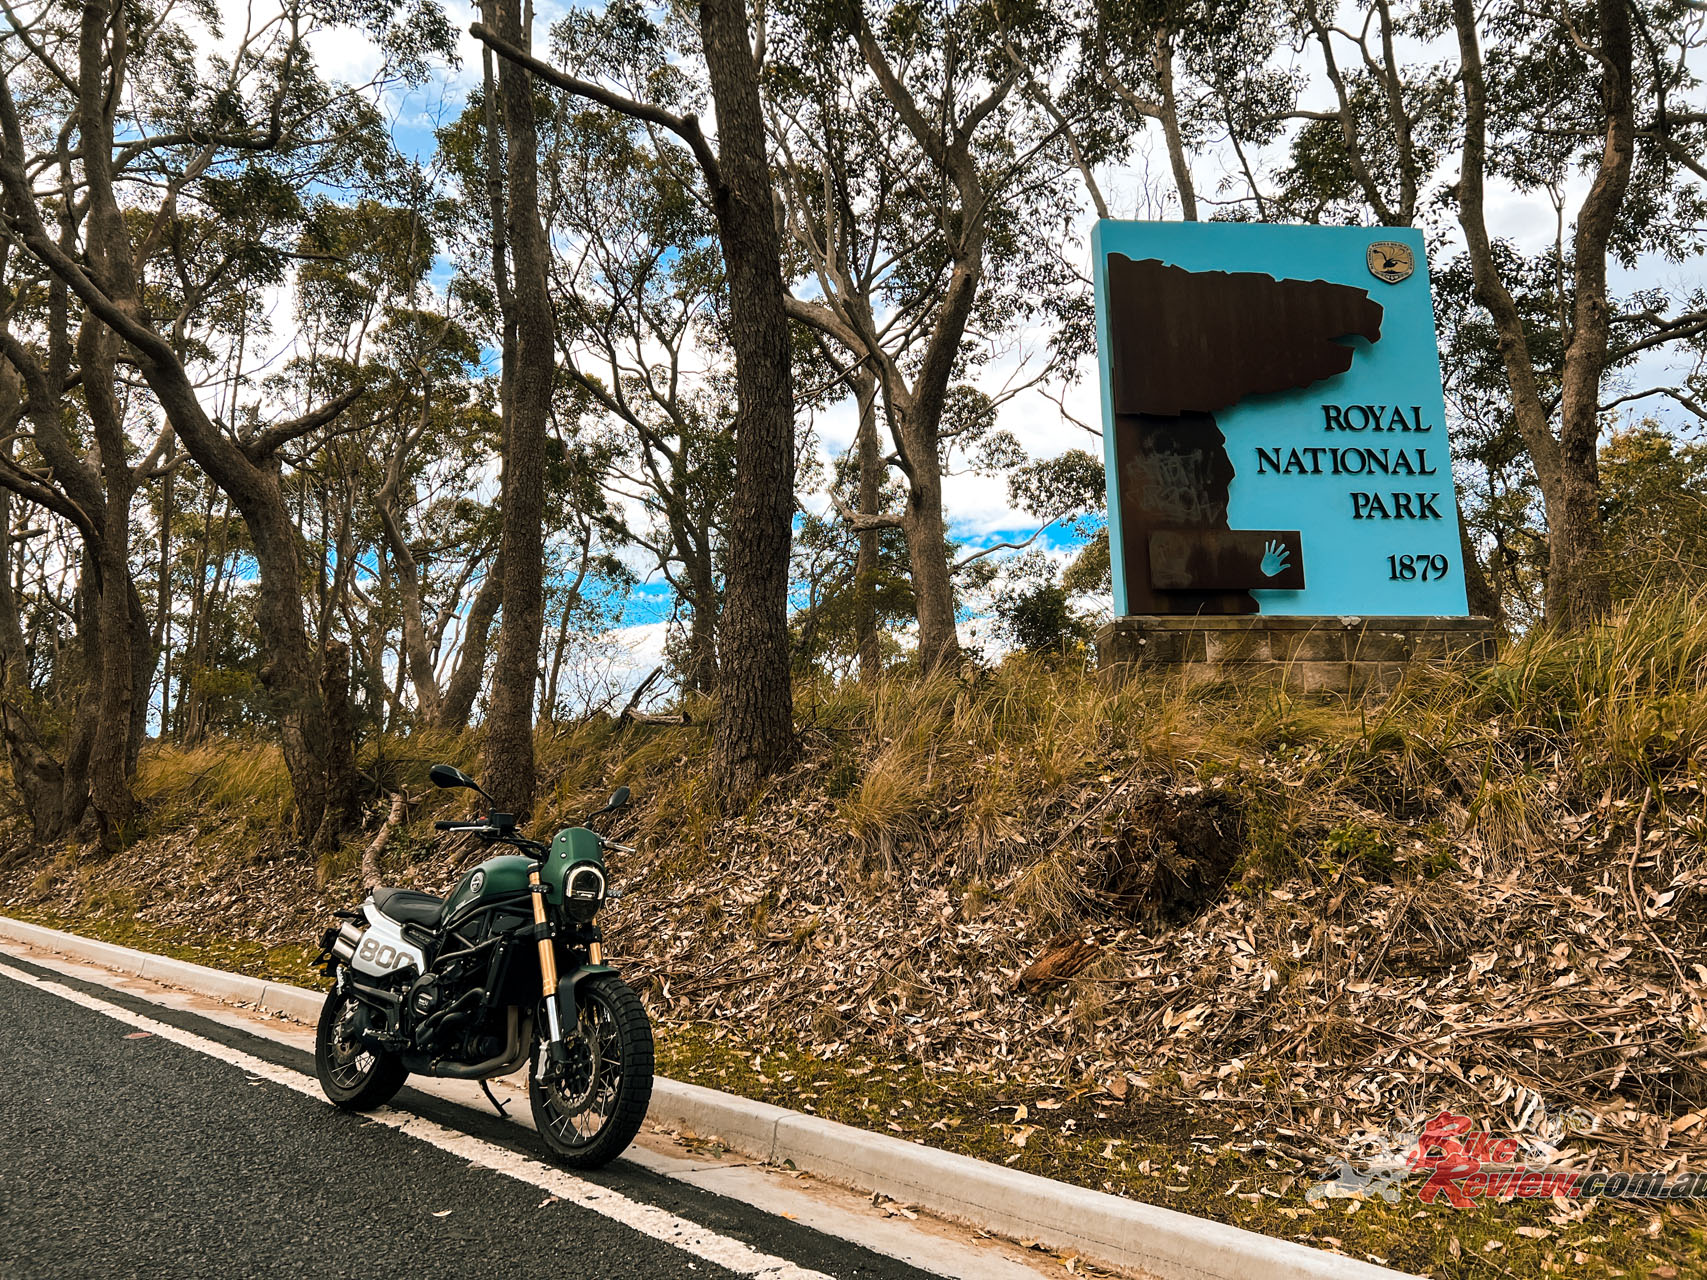 This long-termer update, Zane heads out to the Royal Nasho Park for a quick tour on the Benelli Leoncino 800 Trail.